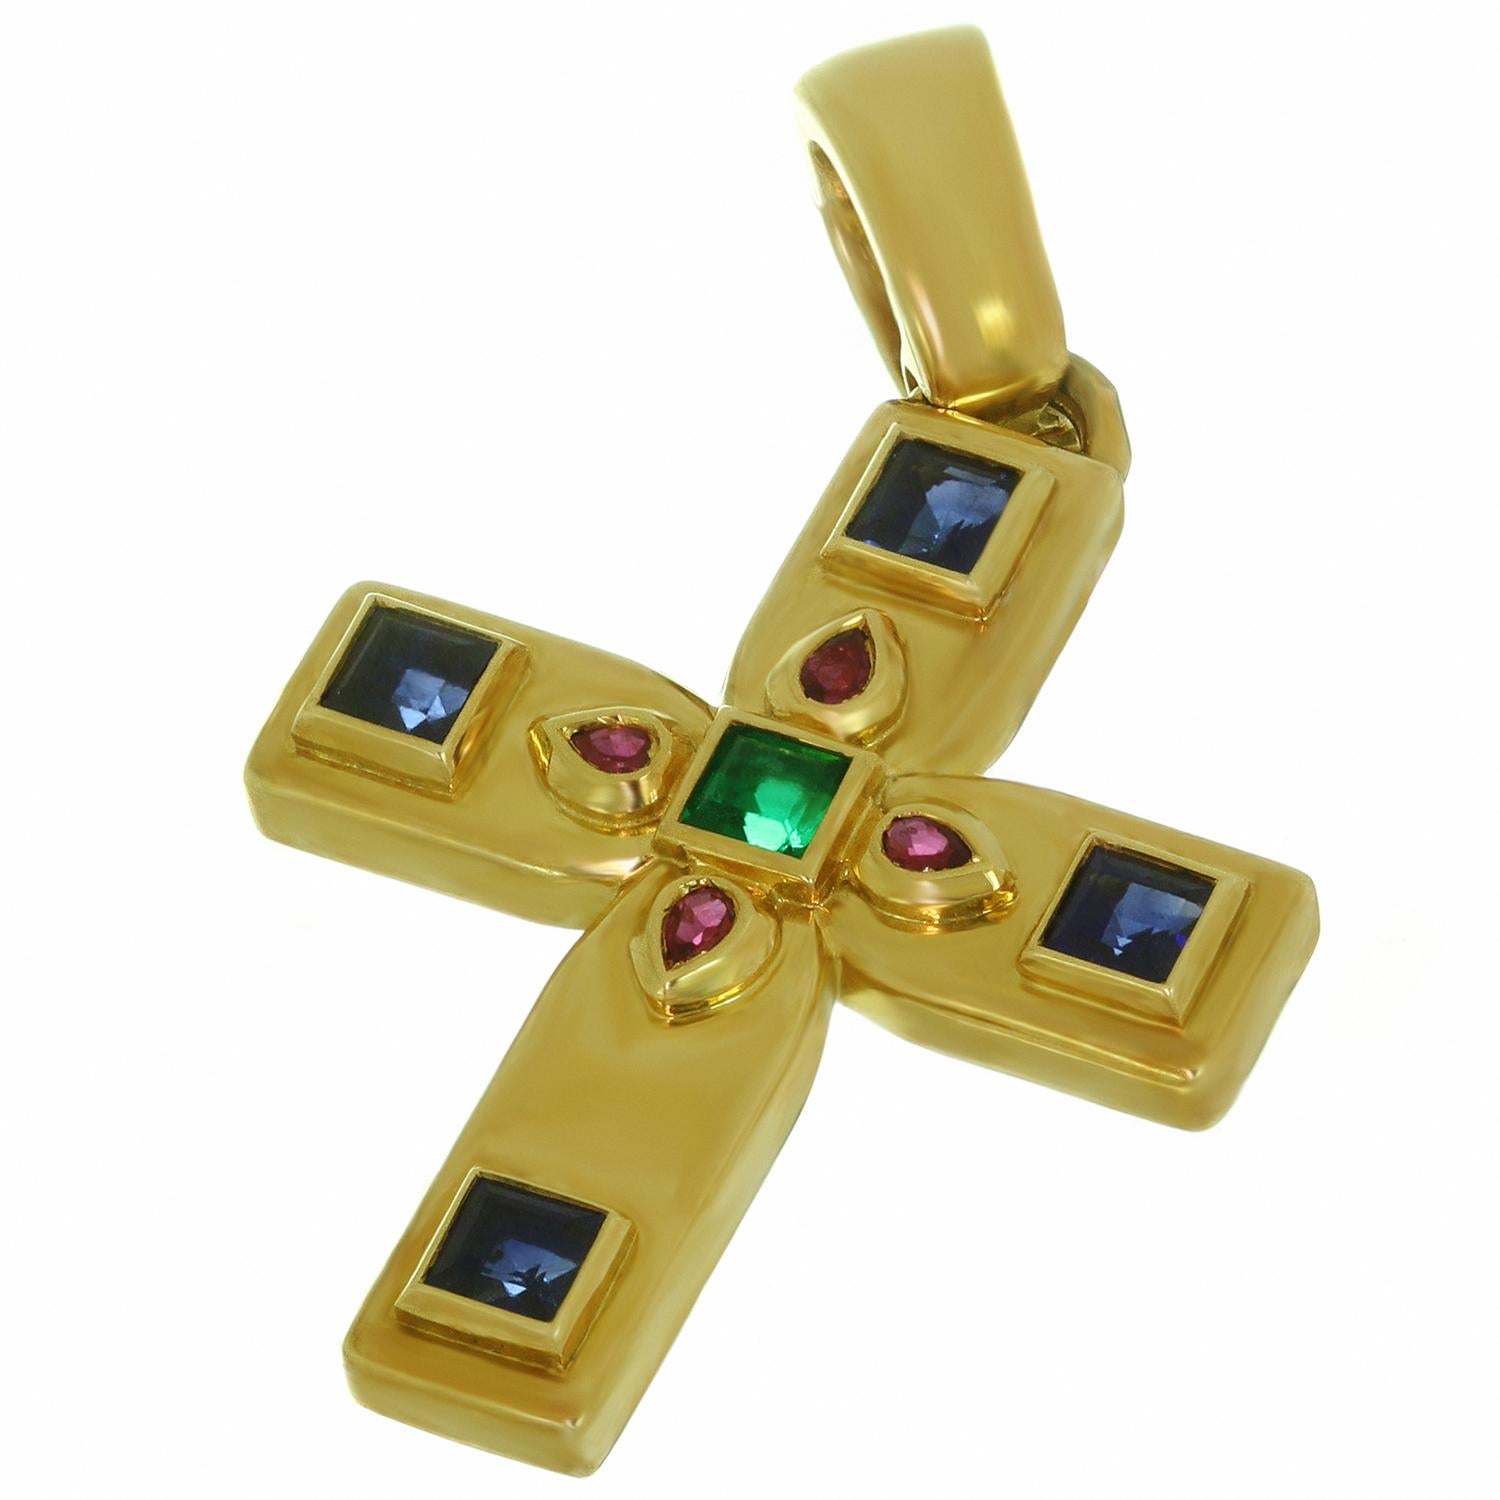 This iconic Cartier small cross pendant is crafted in 18k yellow gold and set with faceted rubies, sapphires, and emerald.  The Byzantine motif was designed by Louis Cartier during his trip to Russia in the early part of the 20th century, providing